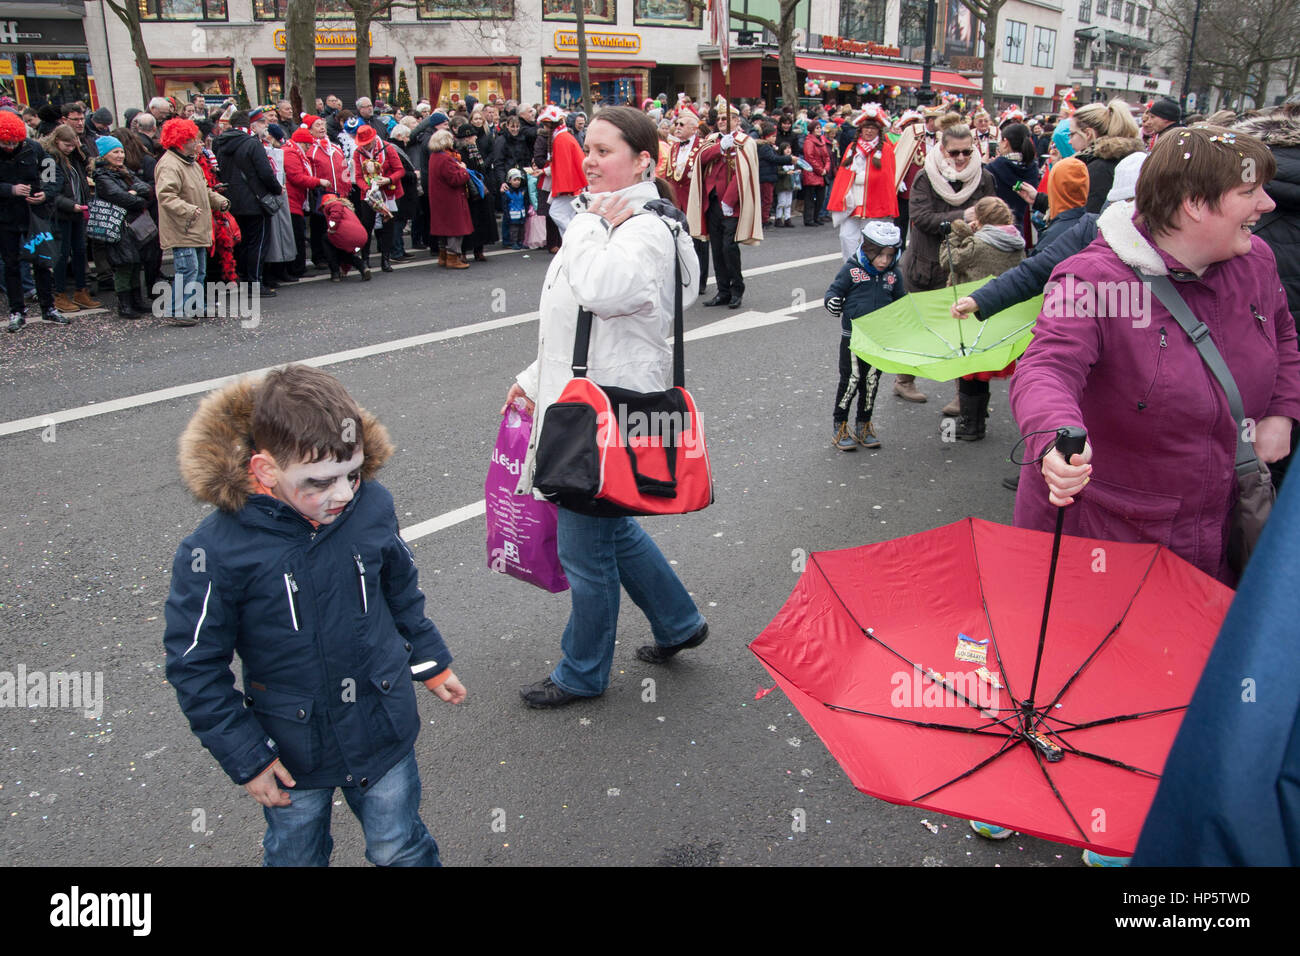 Berlin, Germany. 19th Feb, 2017. Carnival parade. Spectators catch sweets (thrown by the parade) with reversed umbrellas. Stock Photo